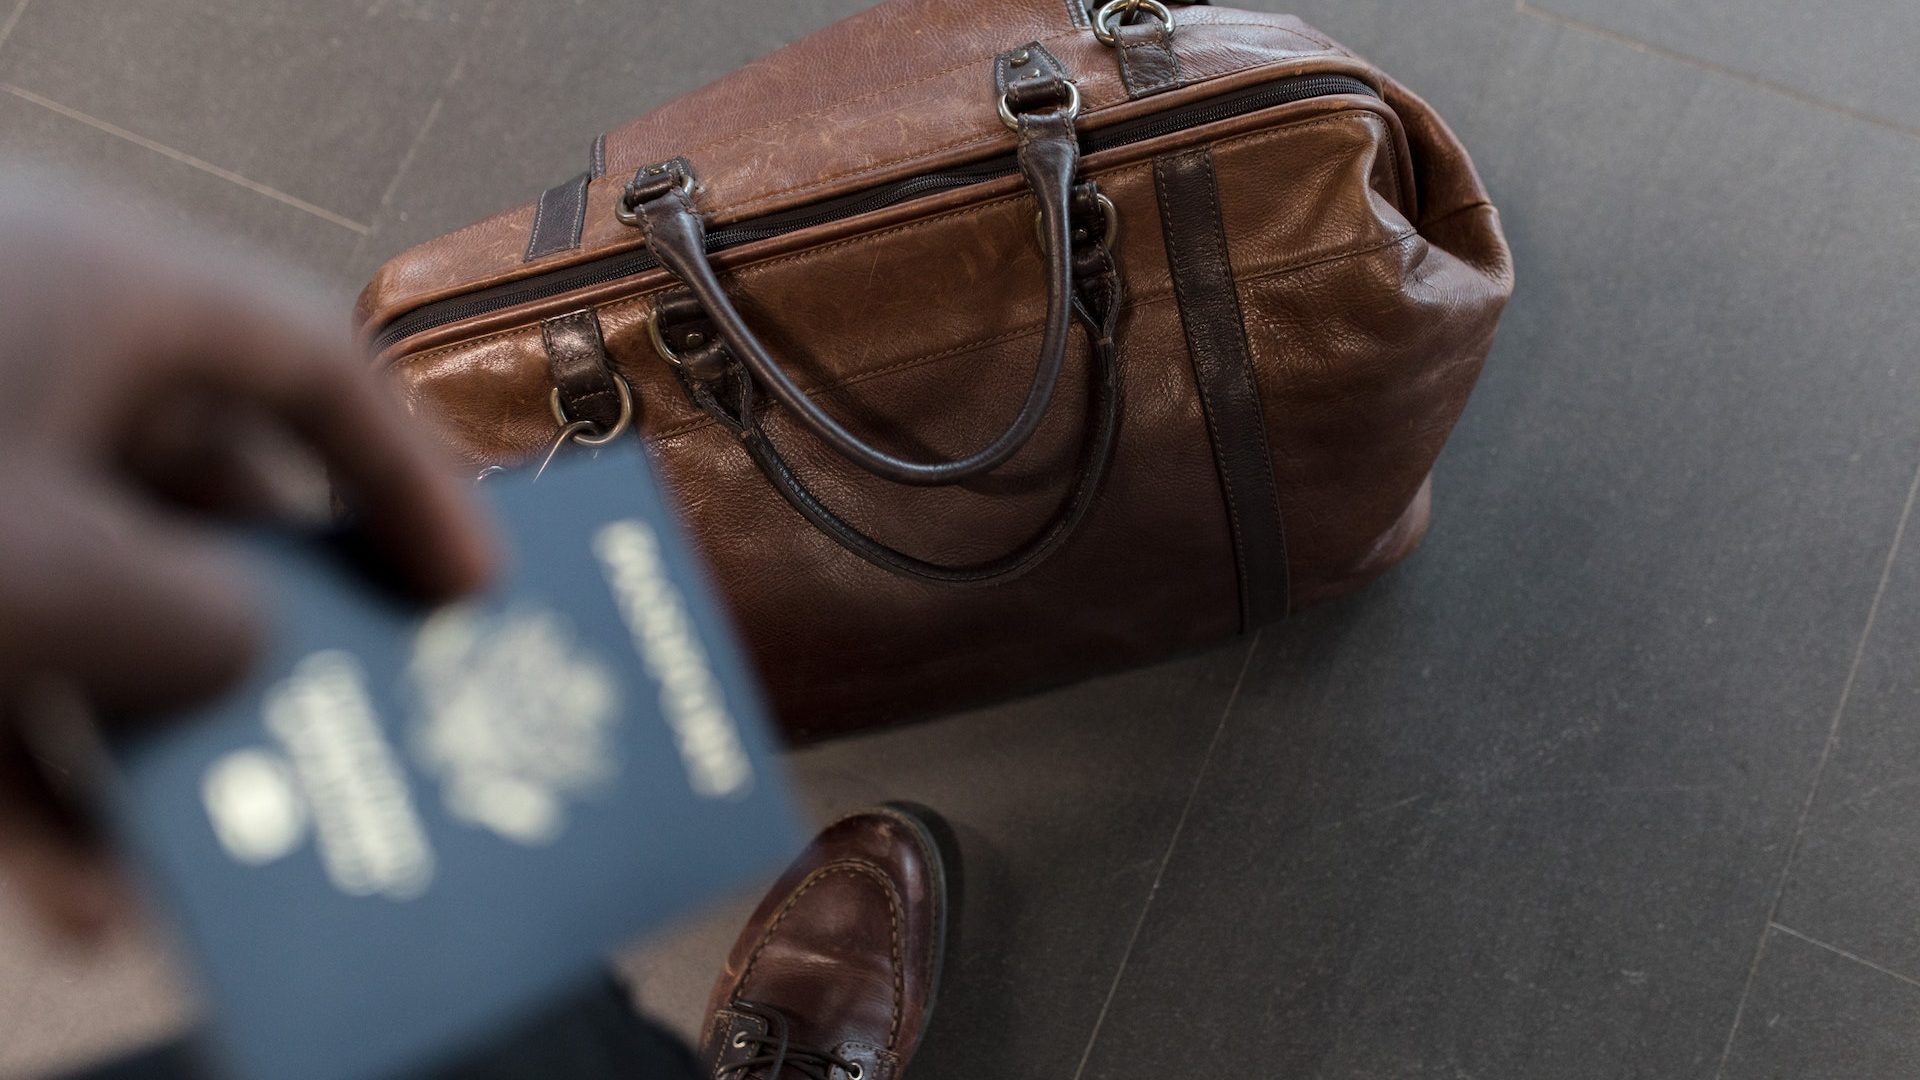 Stock photo of a person holding their passport while their luggage bag is at their feet.